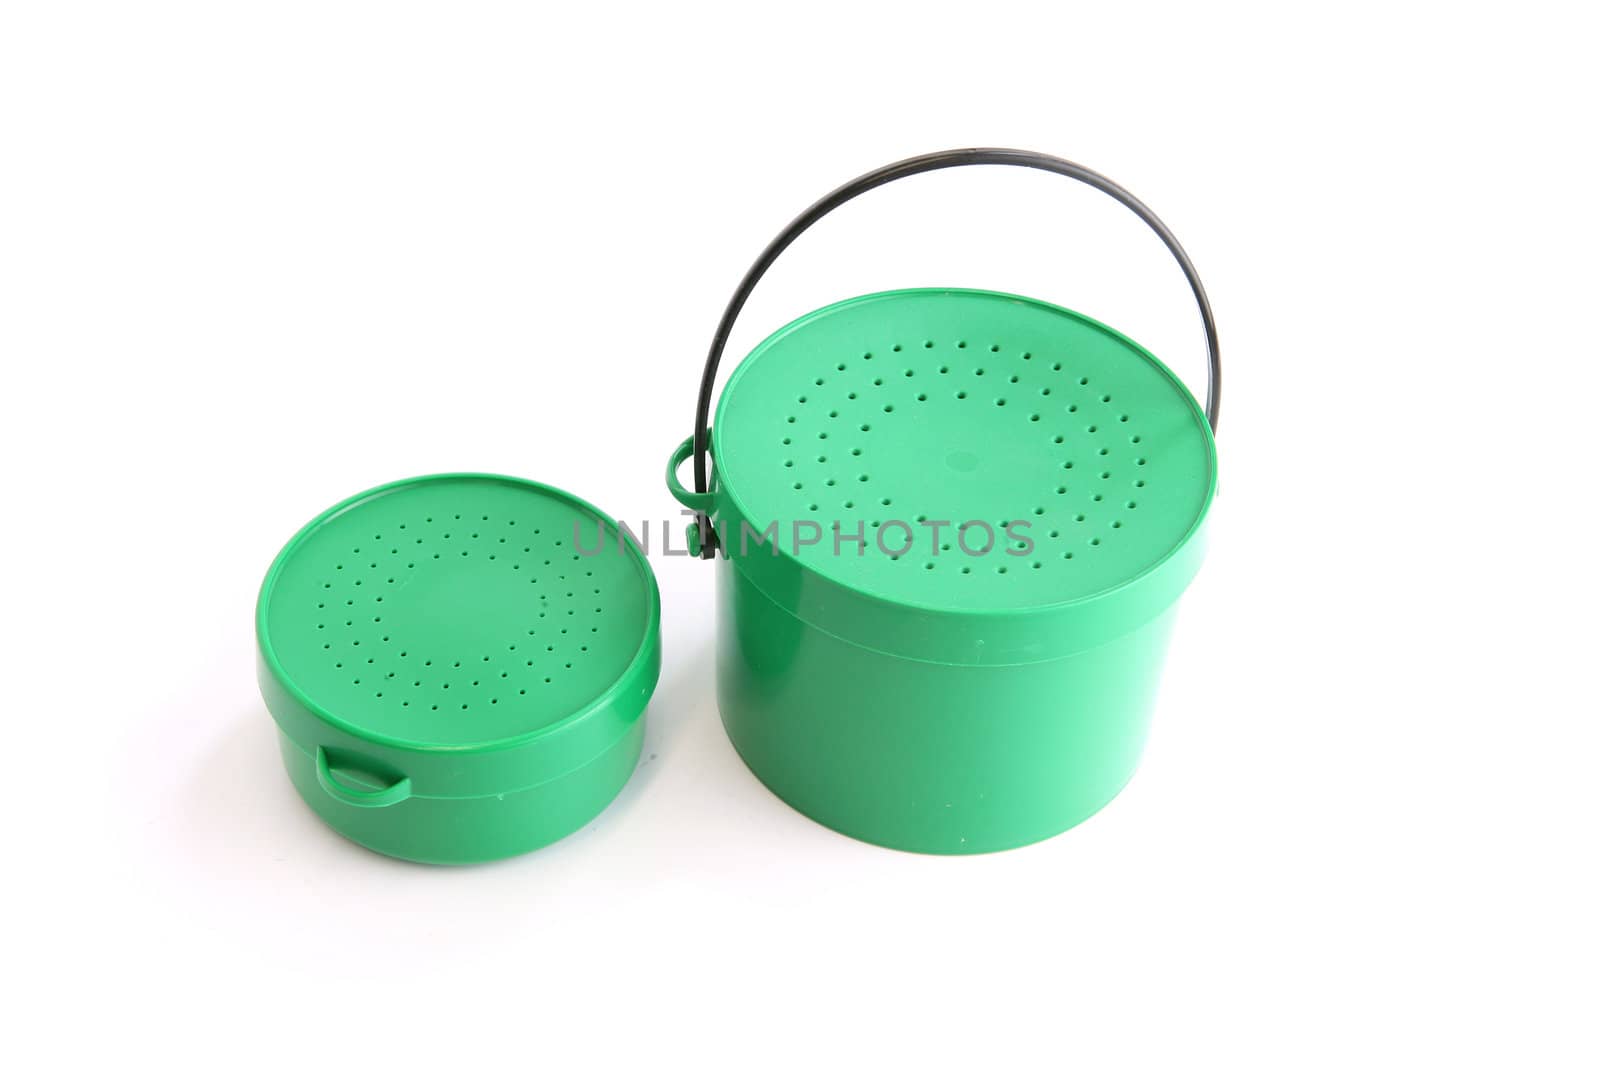 Two green tins with perforated lids